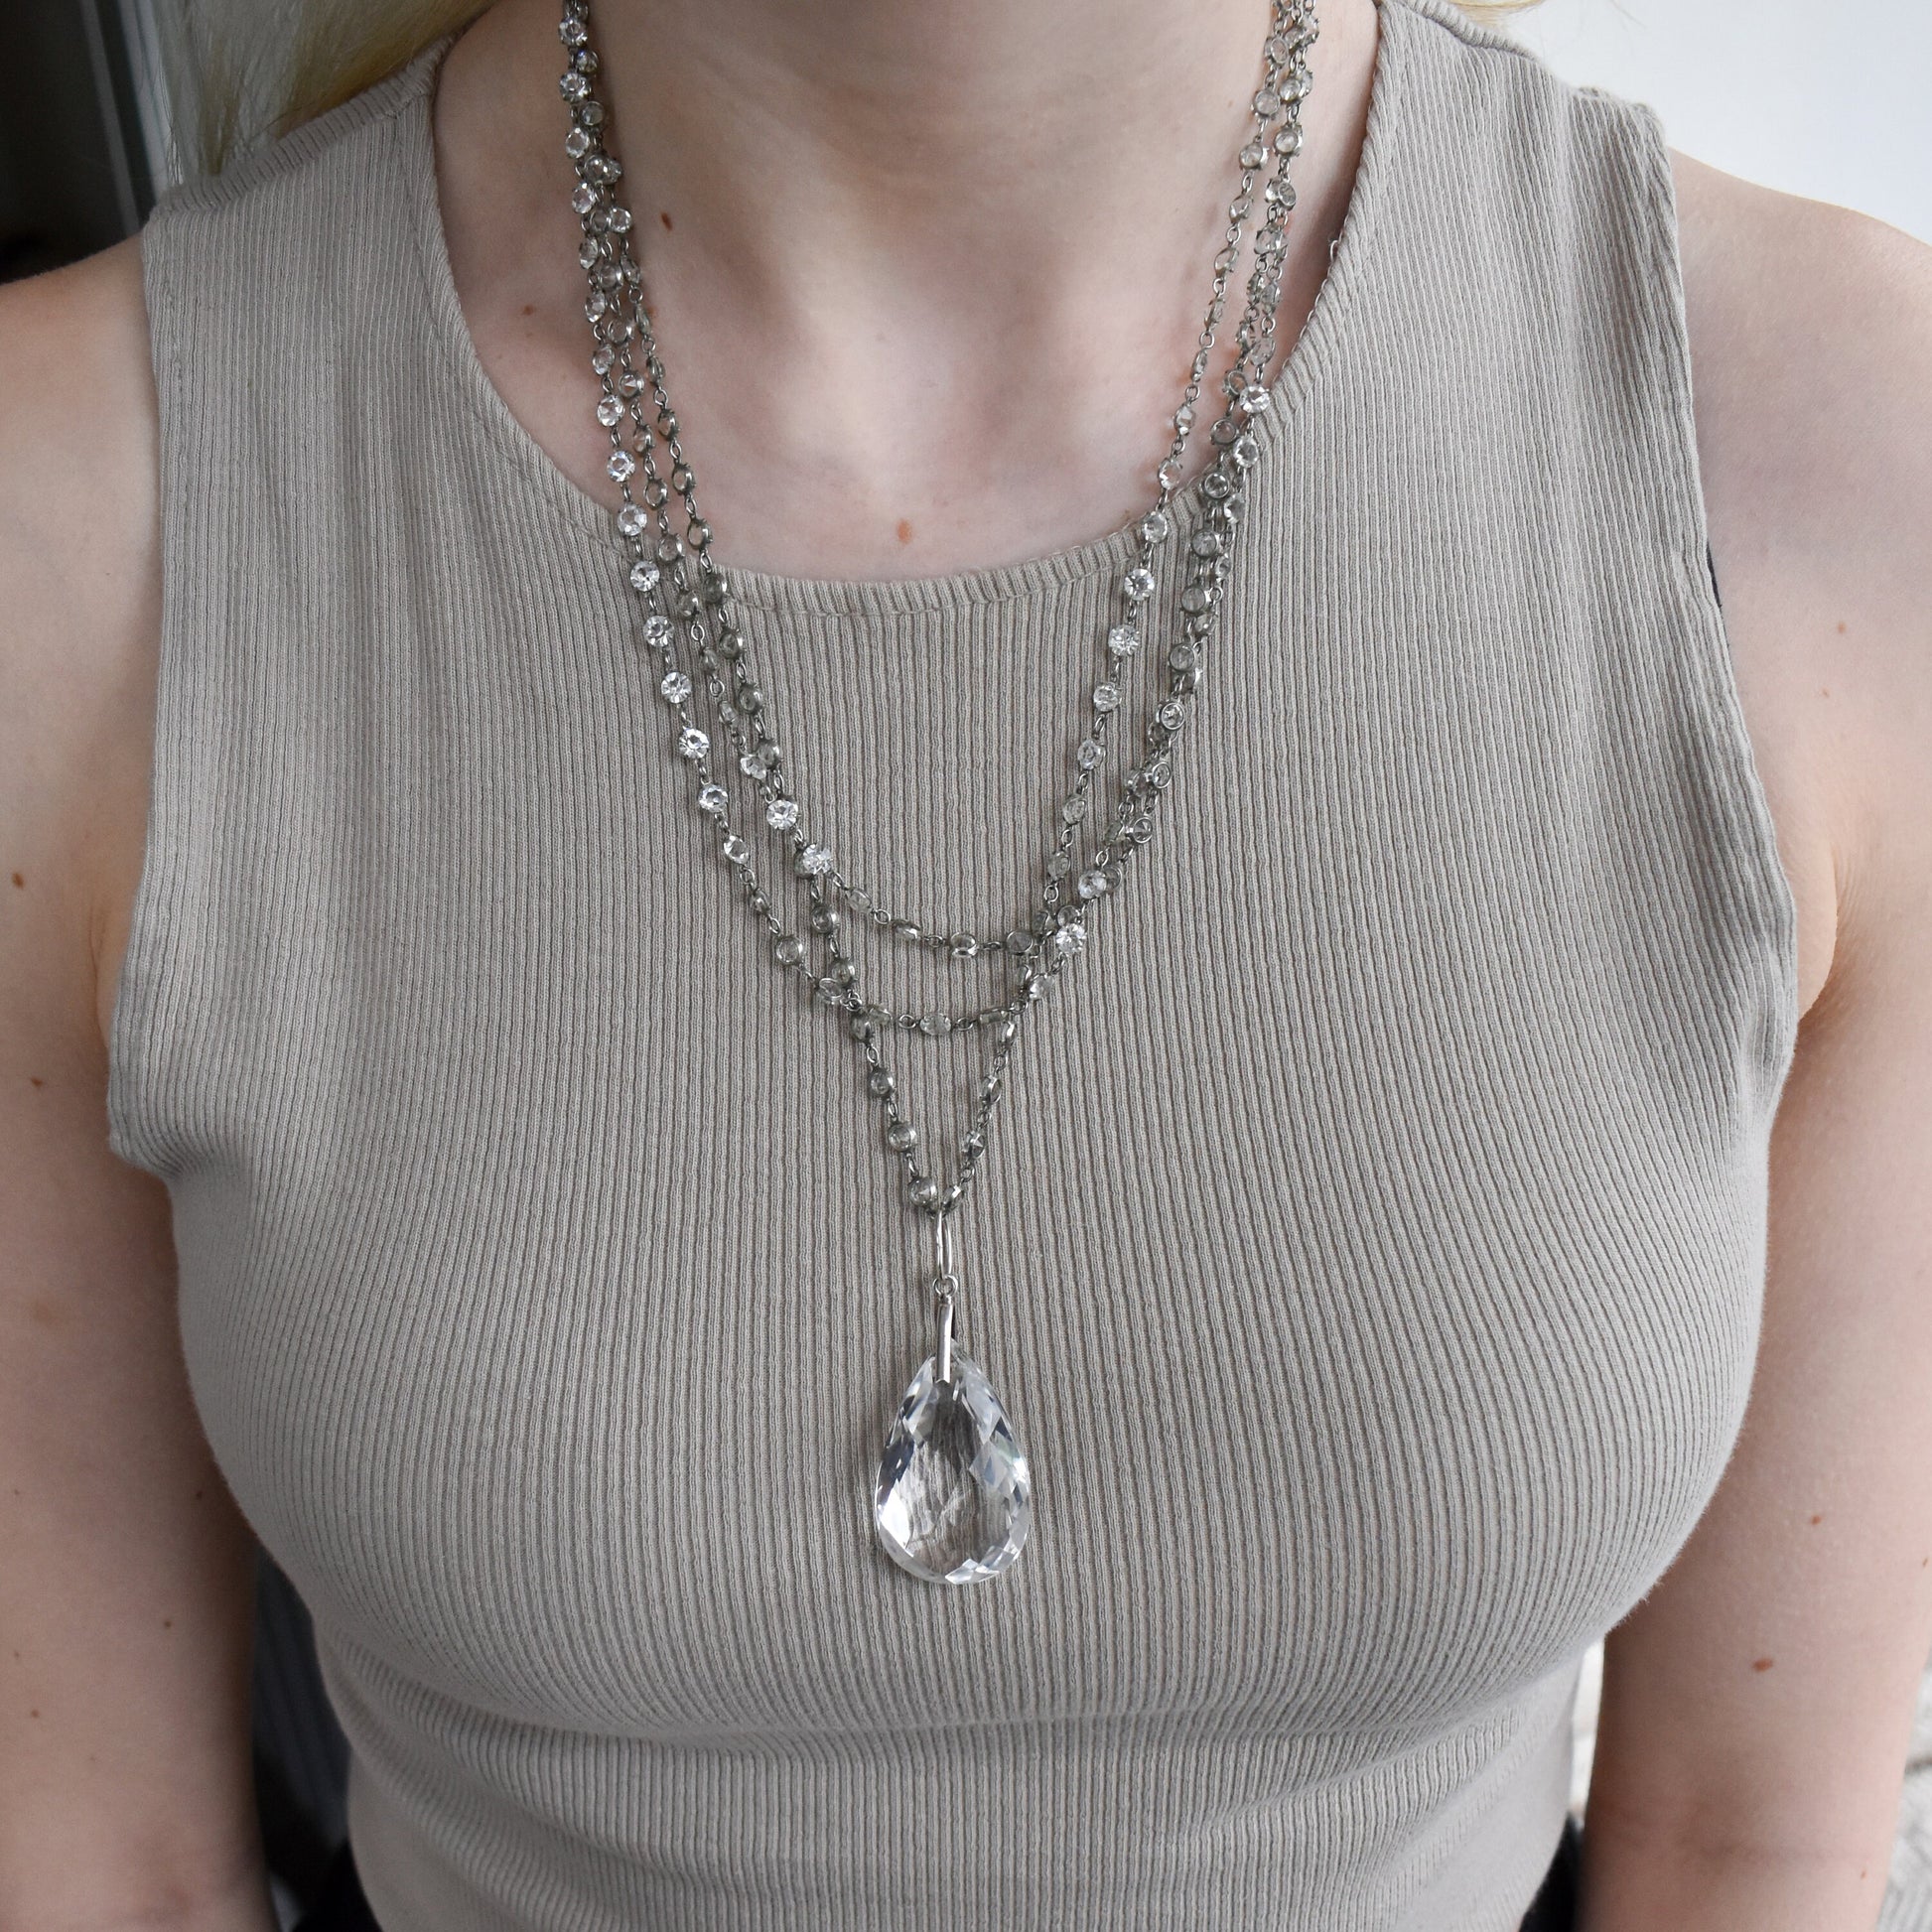 Antique Art Deco Paste and Rock Crystal Long Guard Muff Chain Platinon Necklace | 61"